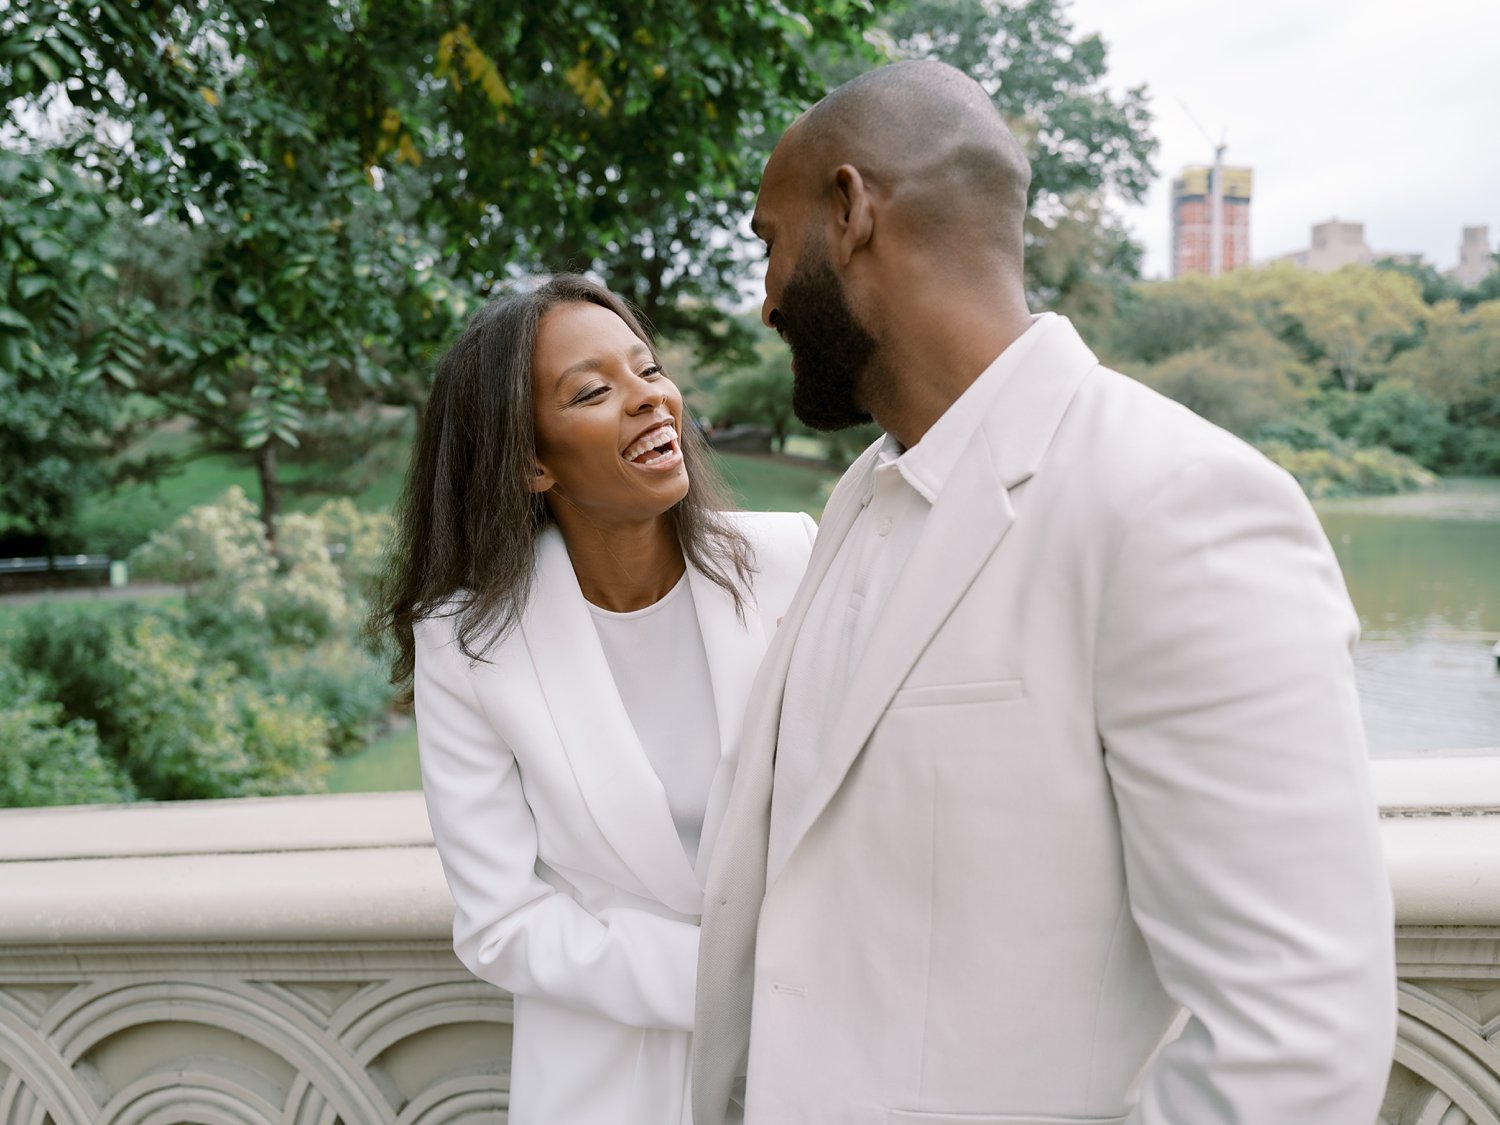 wife laughs up at husband during Central Park anniversary portraits in NYC